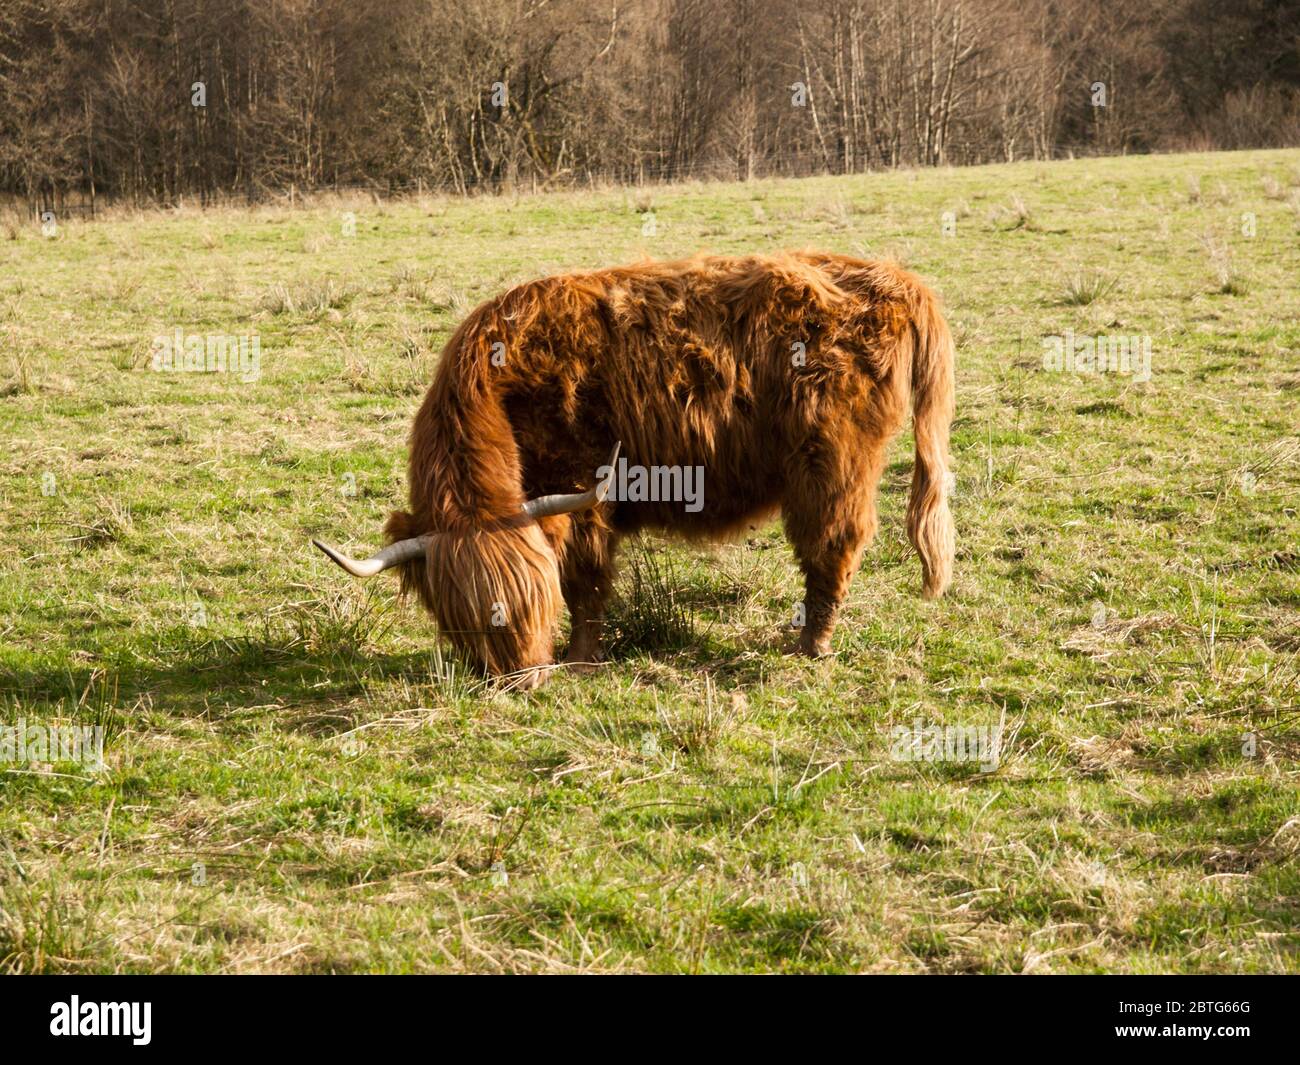 Breed Profile: Highland Cows